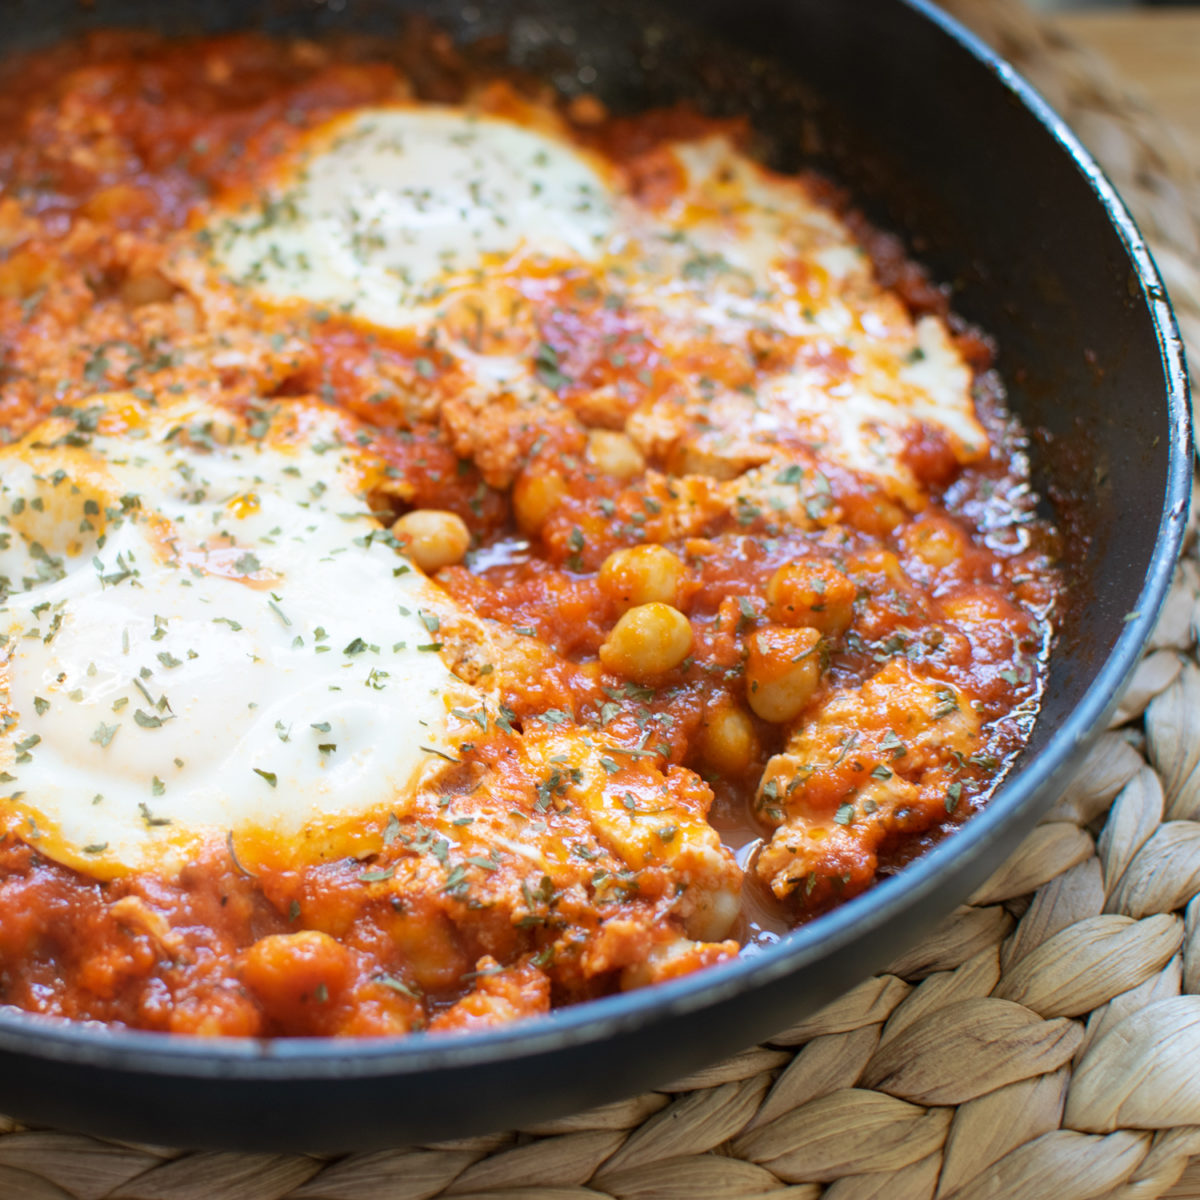 White Beans and eggs in tomato sauce in Frying Pan